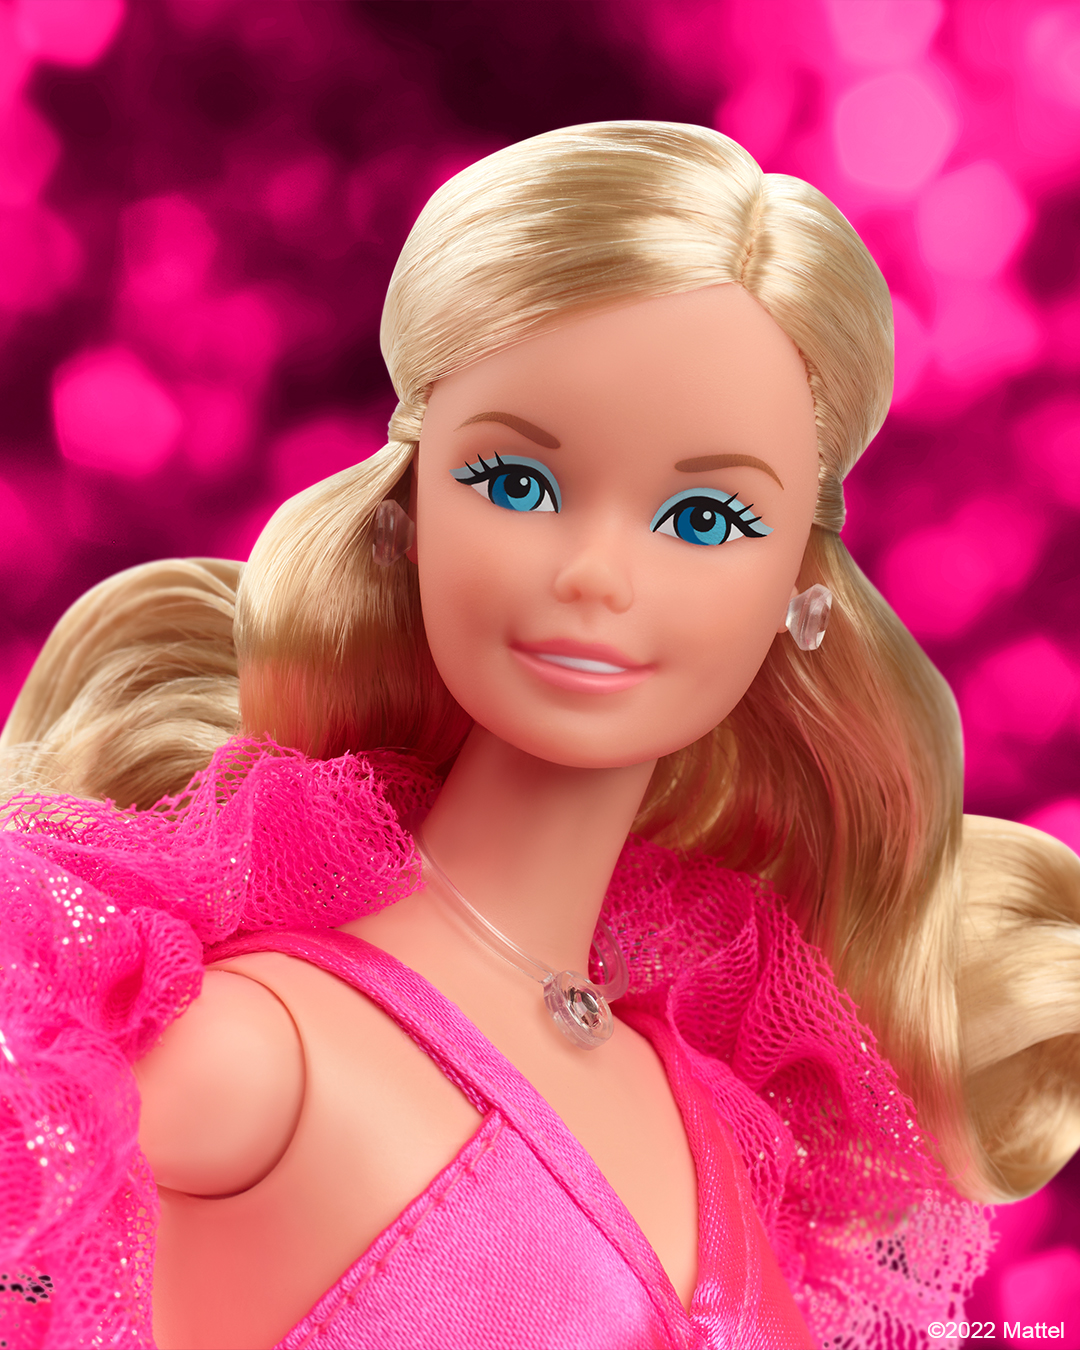 Barbie on X: "Ready to paint the town pink? 💖 Superstar #Barbie is back in  a reproduction of the classic 1977 collector favorite doll, in one of her  glitziest looks from the